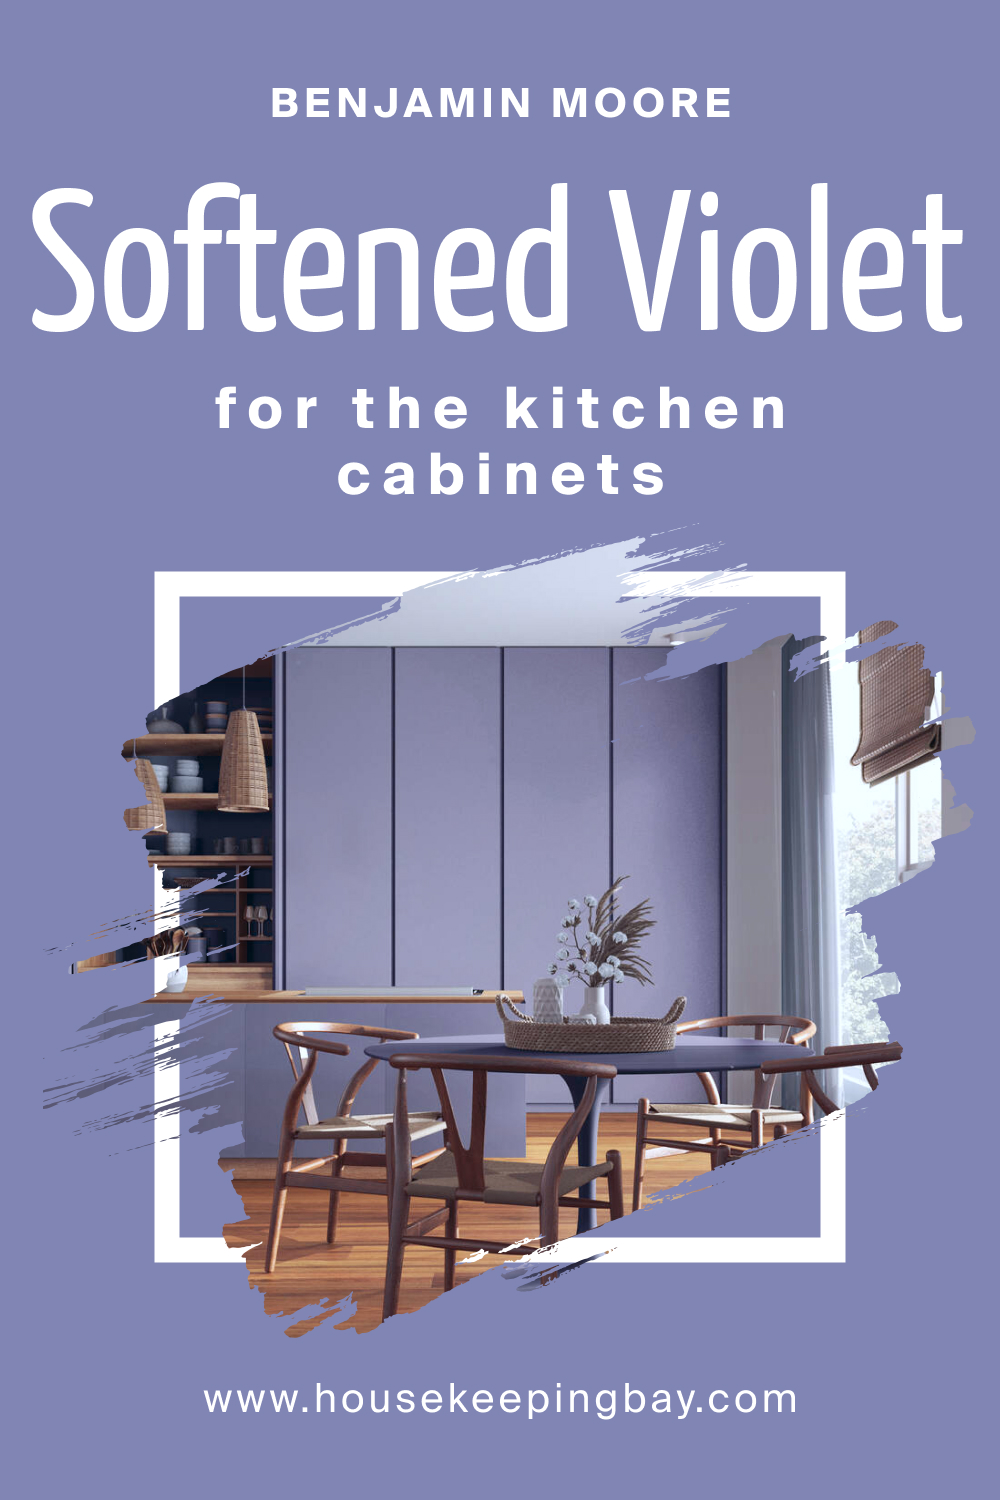 How to Use BM Softened Violet 1420 on Kitchen Cabinets?